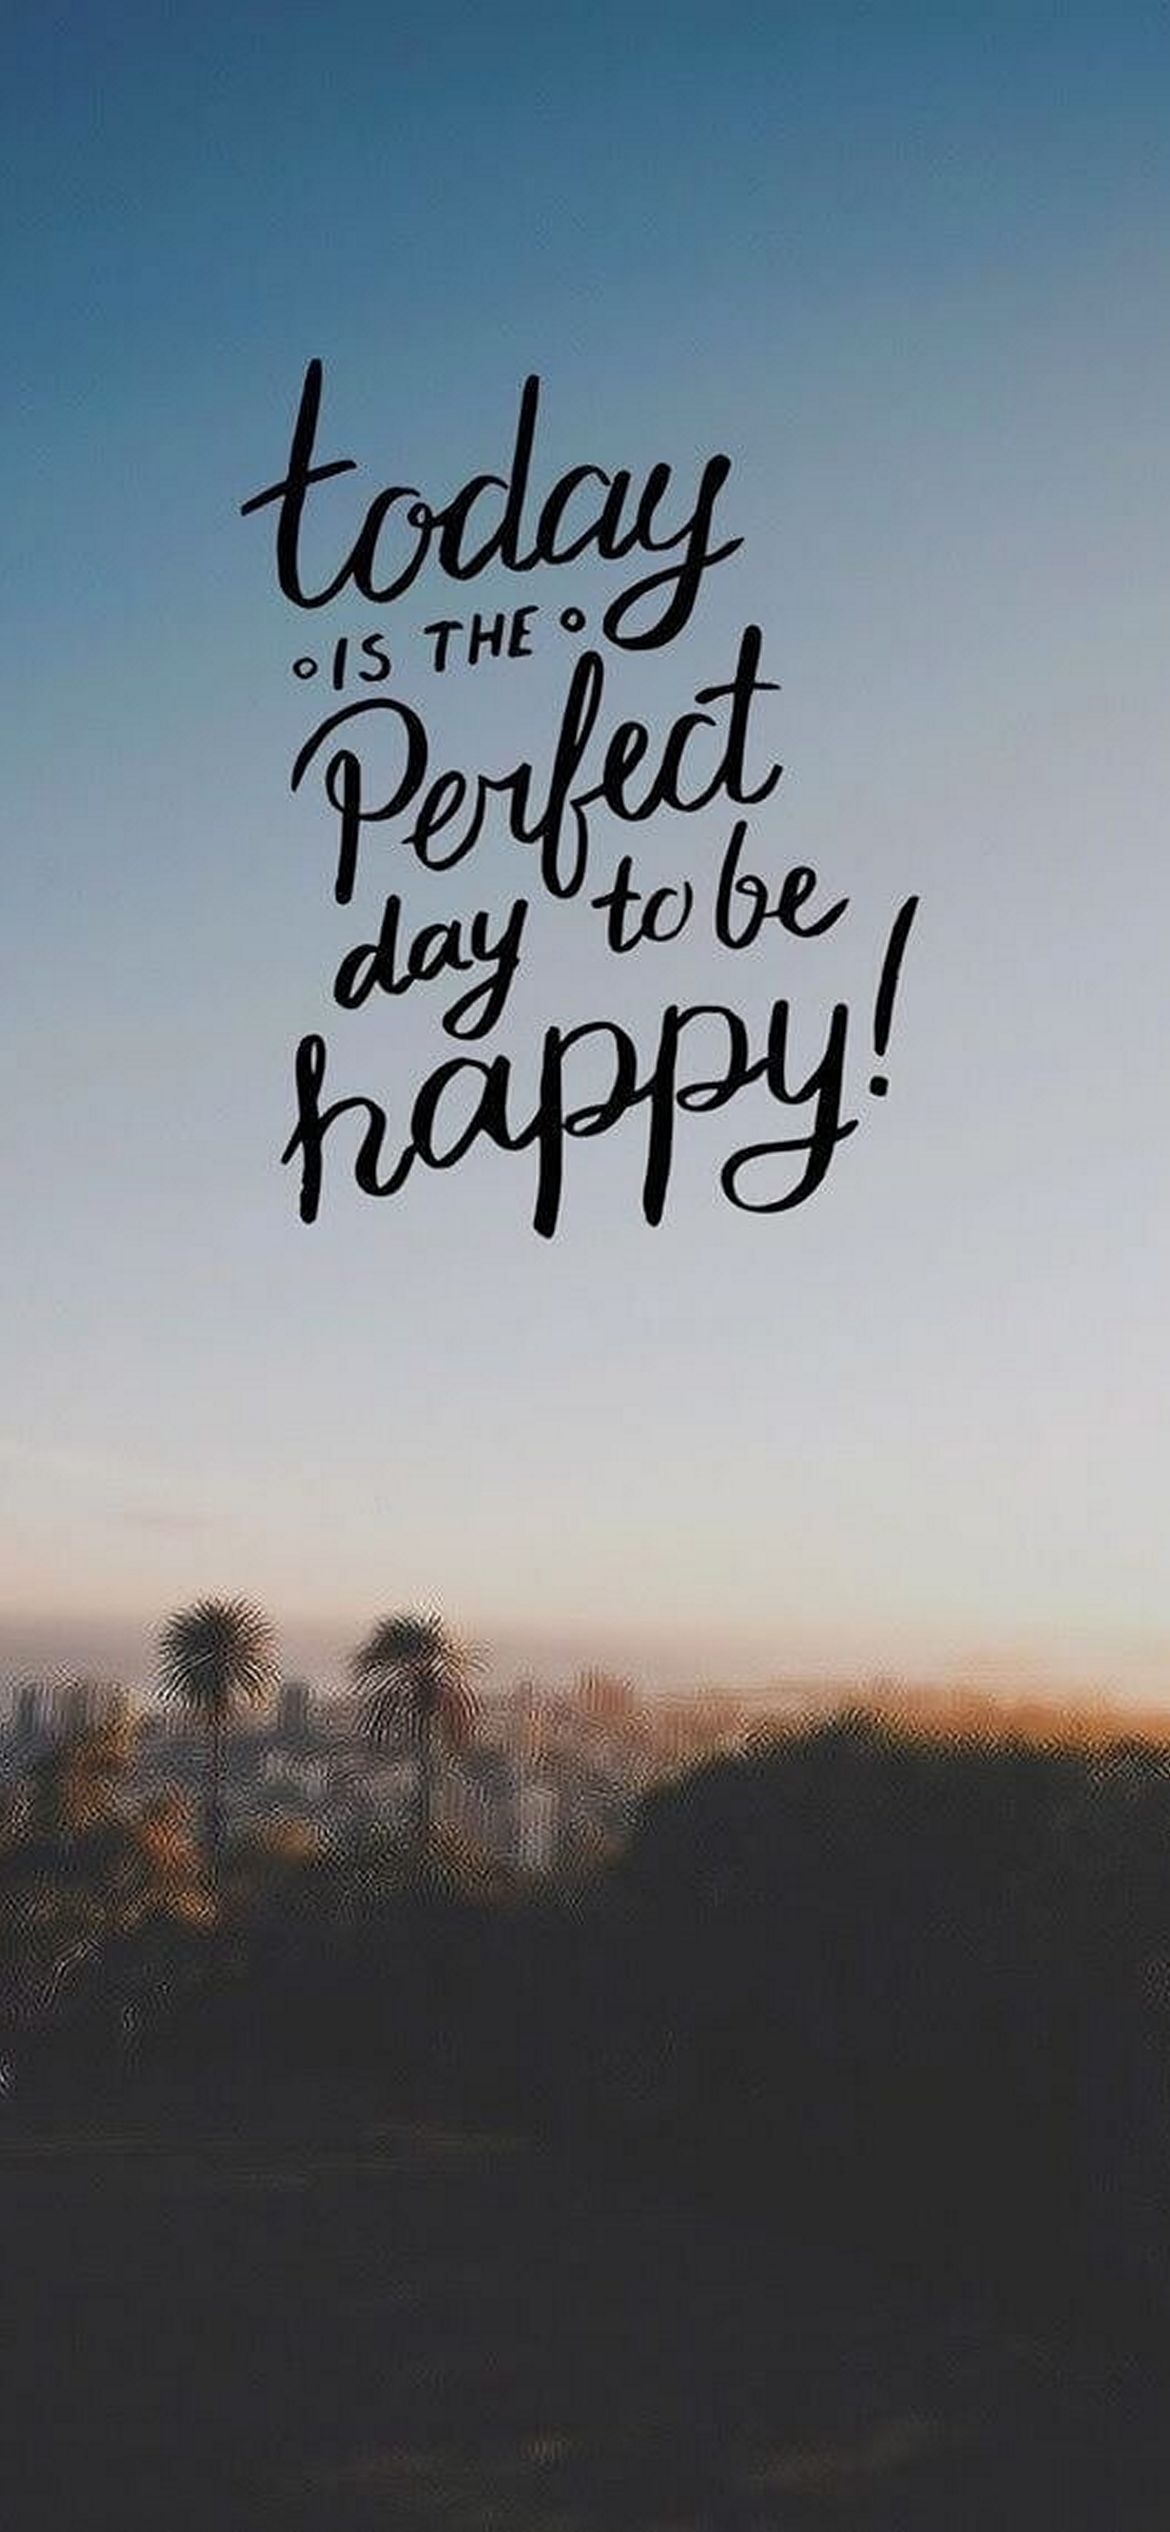 Beautiful Amazing Quote on Stay Happy Wallpapers for Desktop Laptop  Background | HD Wallpapers